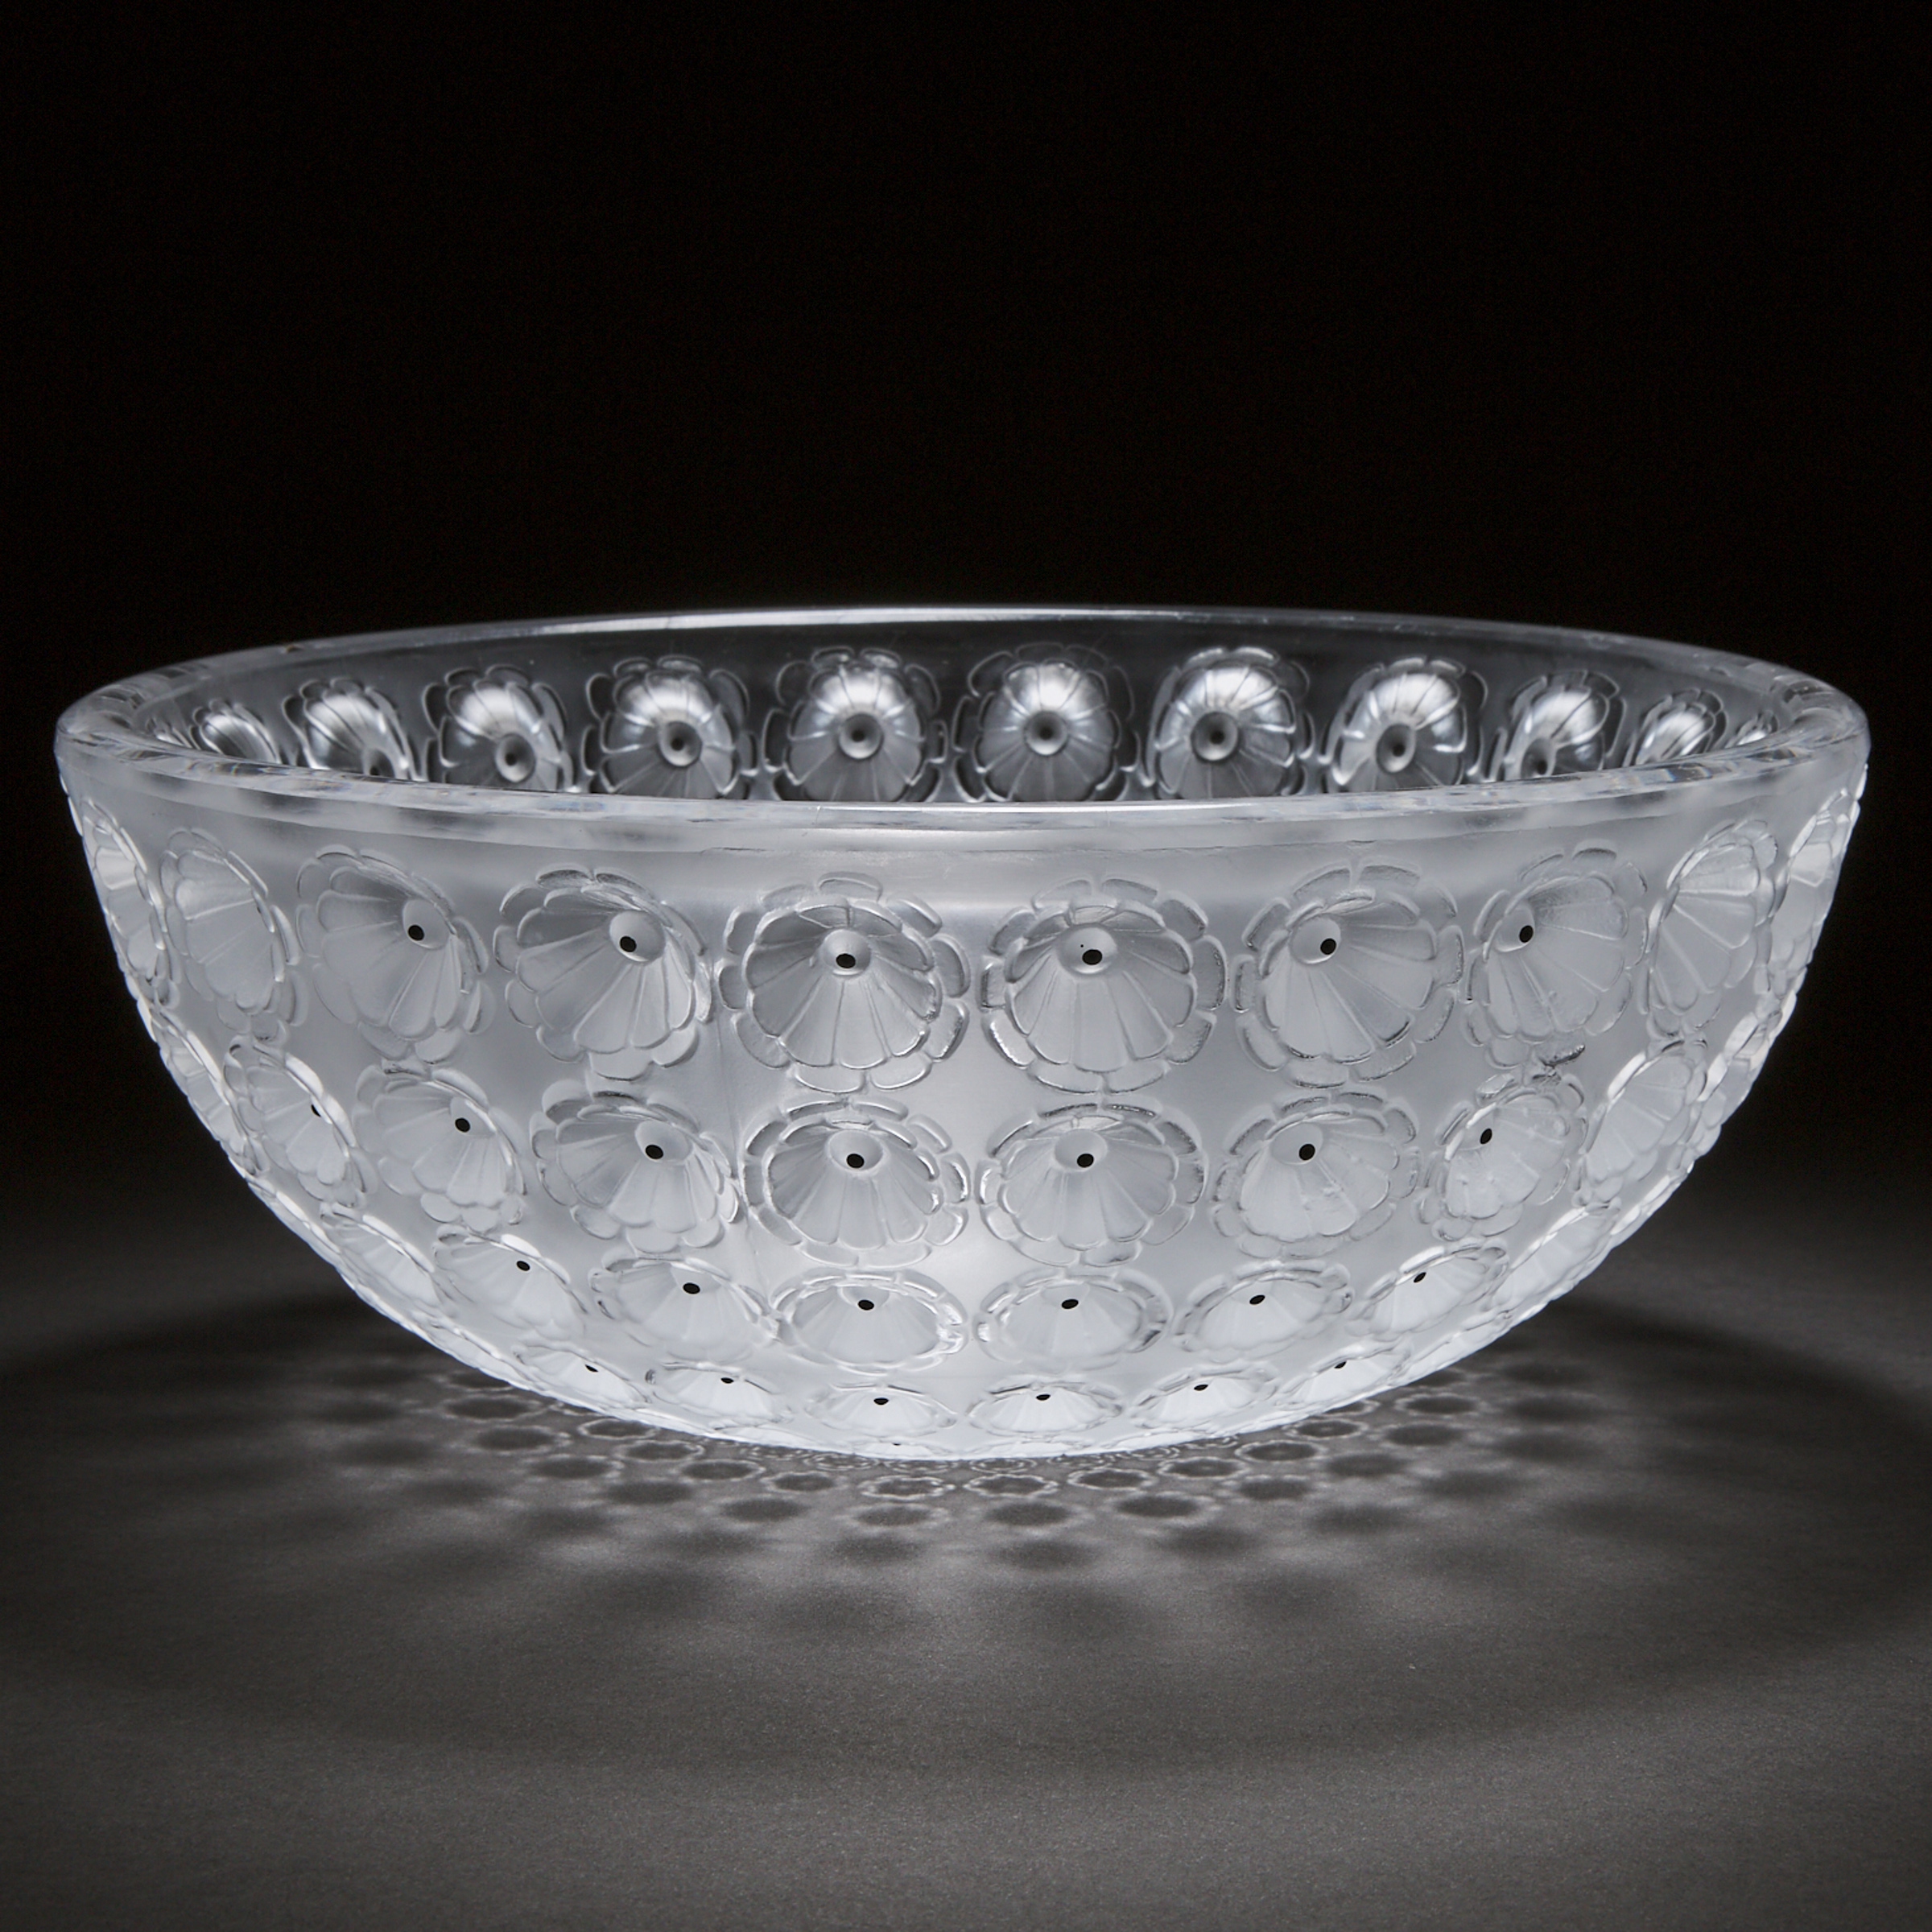 'Nemours', Lalique Frosted and Enameled Glass Bowl, post-1945